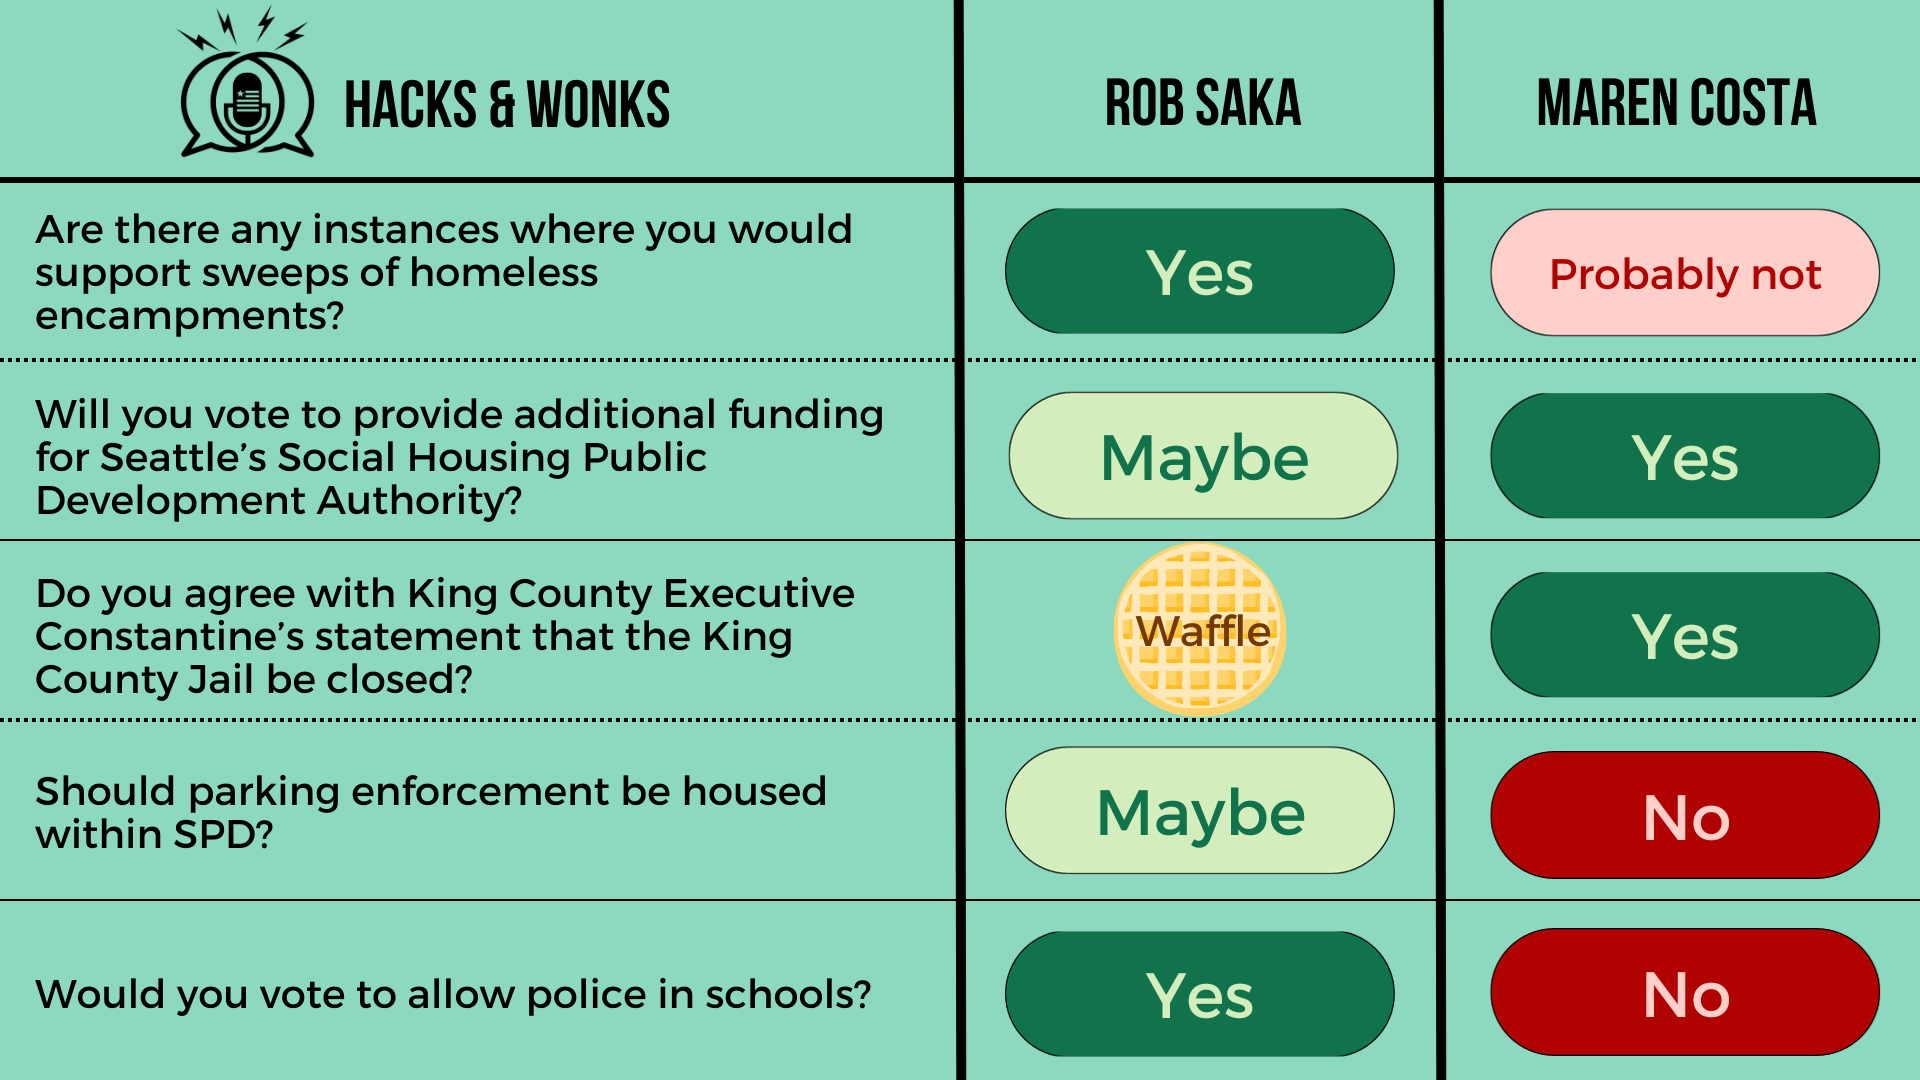 Q: Are there any instances where you would support sweeps of homeless encampments? Rob Saka: Yes, Maren Costa: Probably not  Q: Will you vote to provide additional funding for Seattle’s Social Housing Public Development Authority? Rob Saka: Maybe, Ma